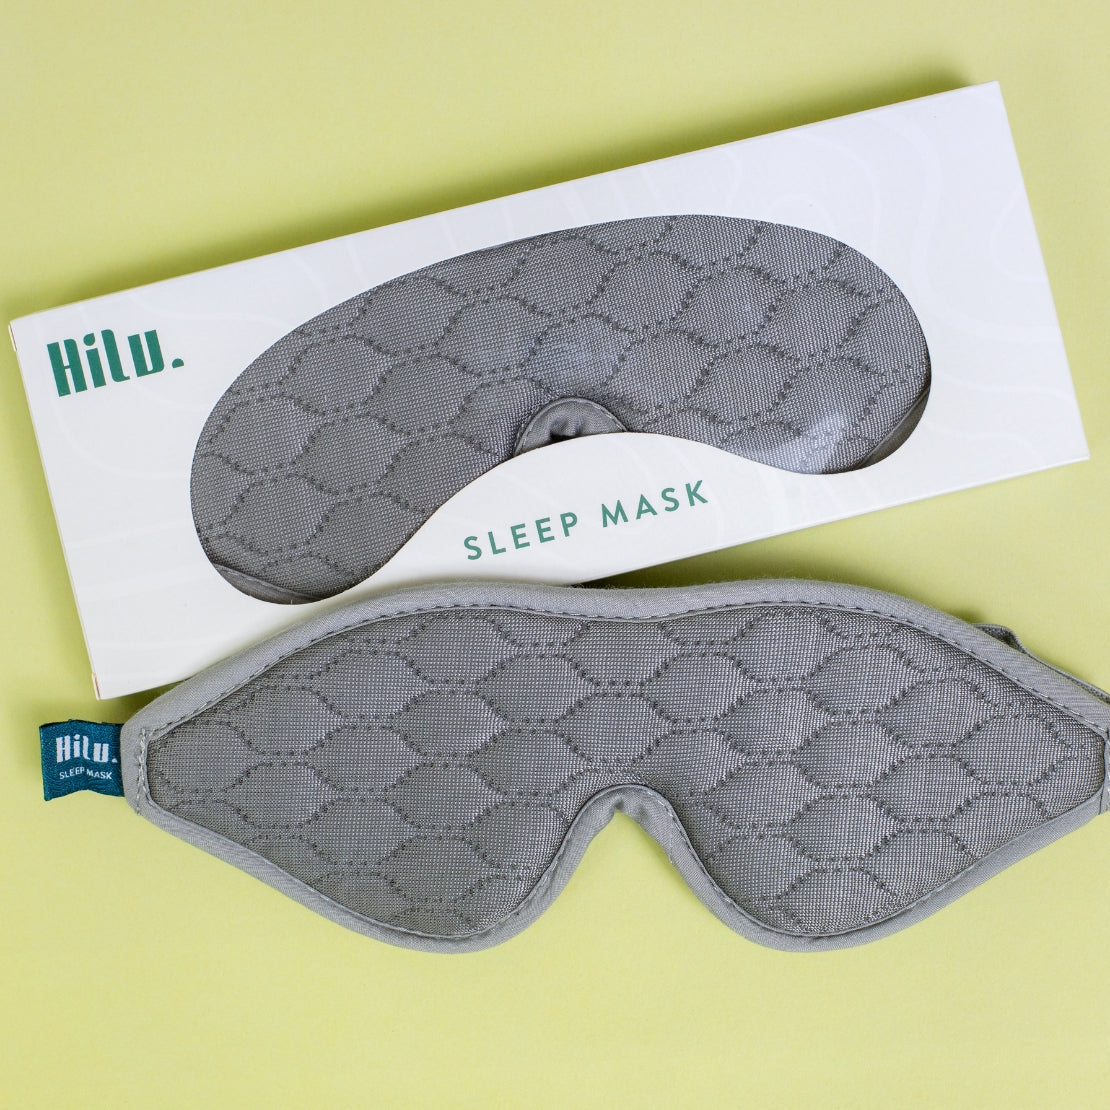 Grey textured sleeping mask with the brand name 'Hilu' displayed on the mask and its packaging